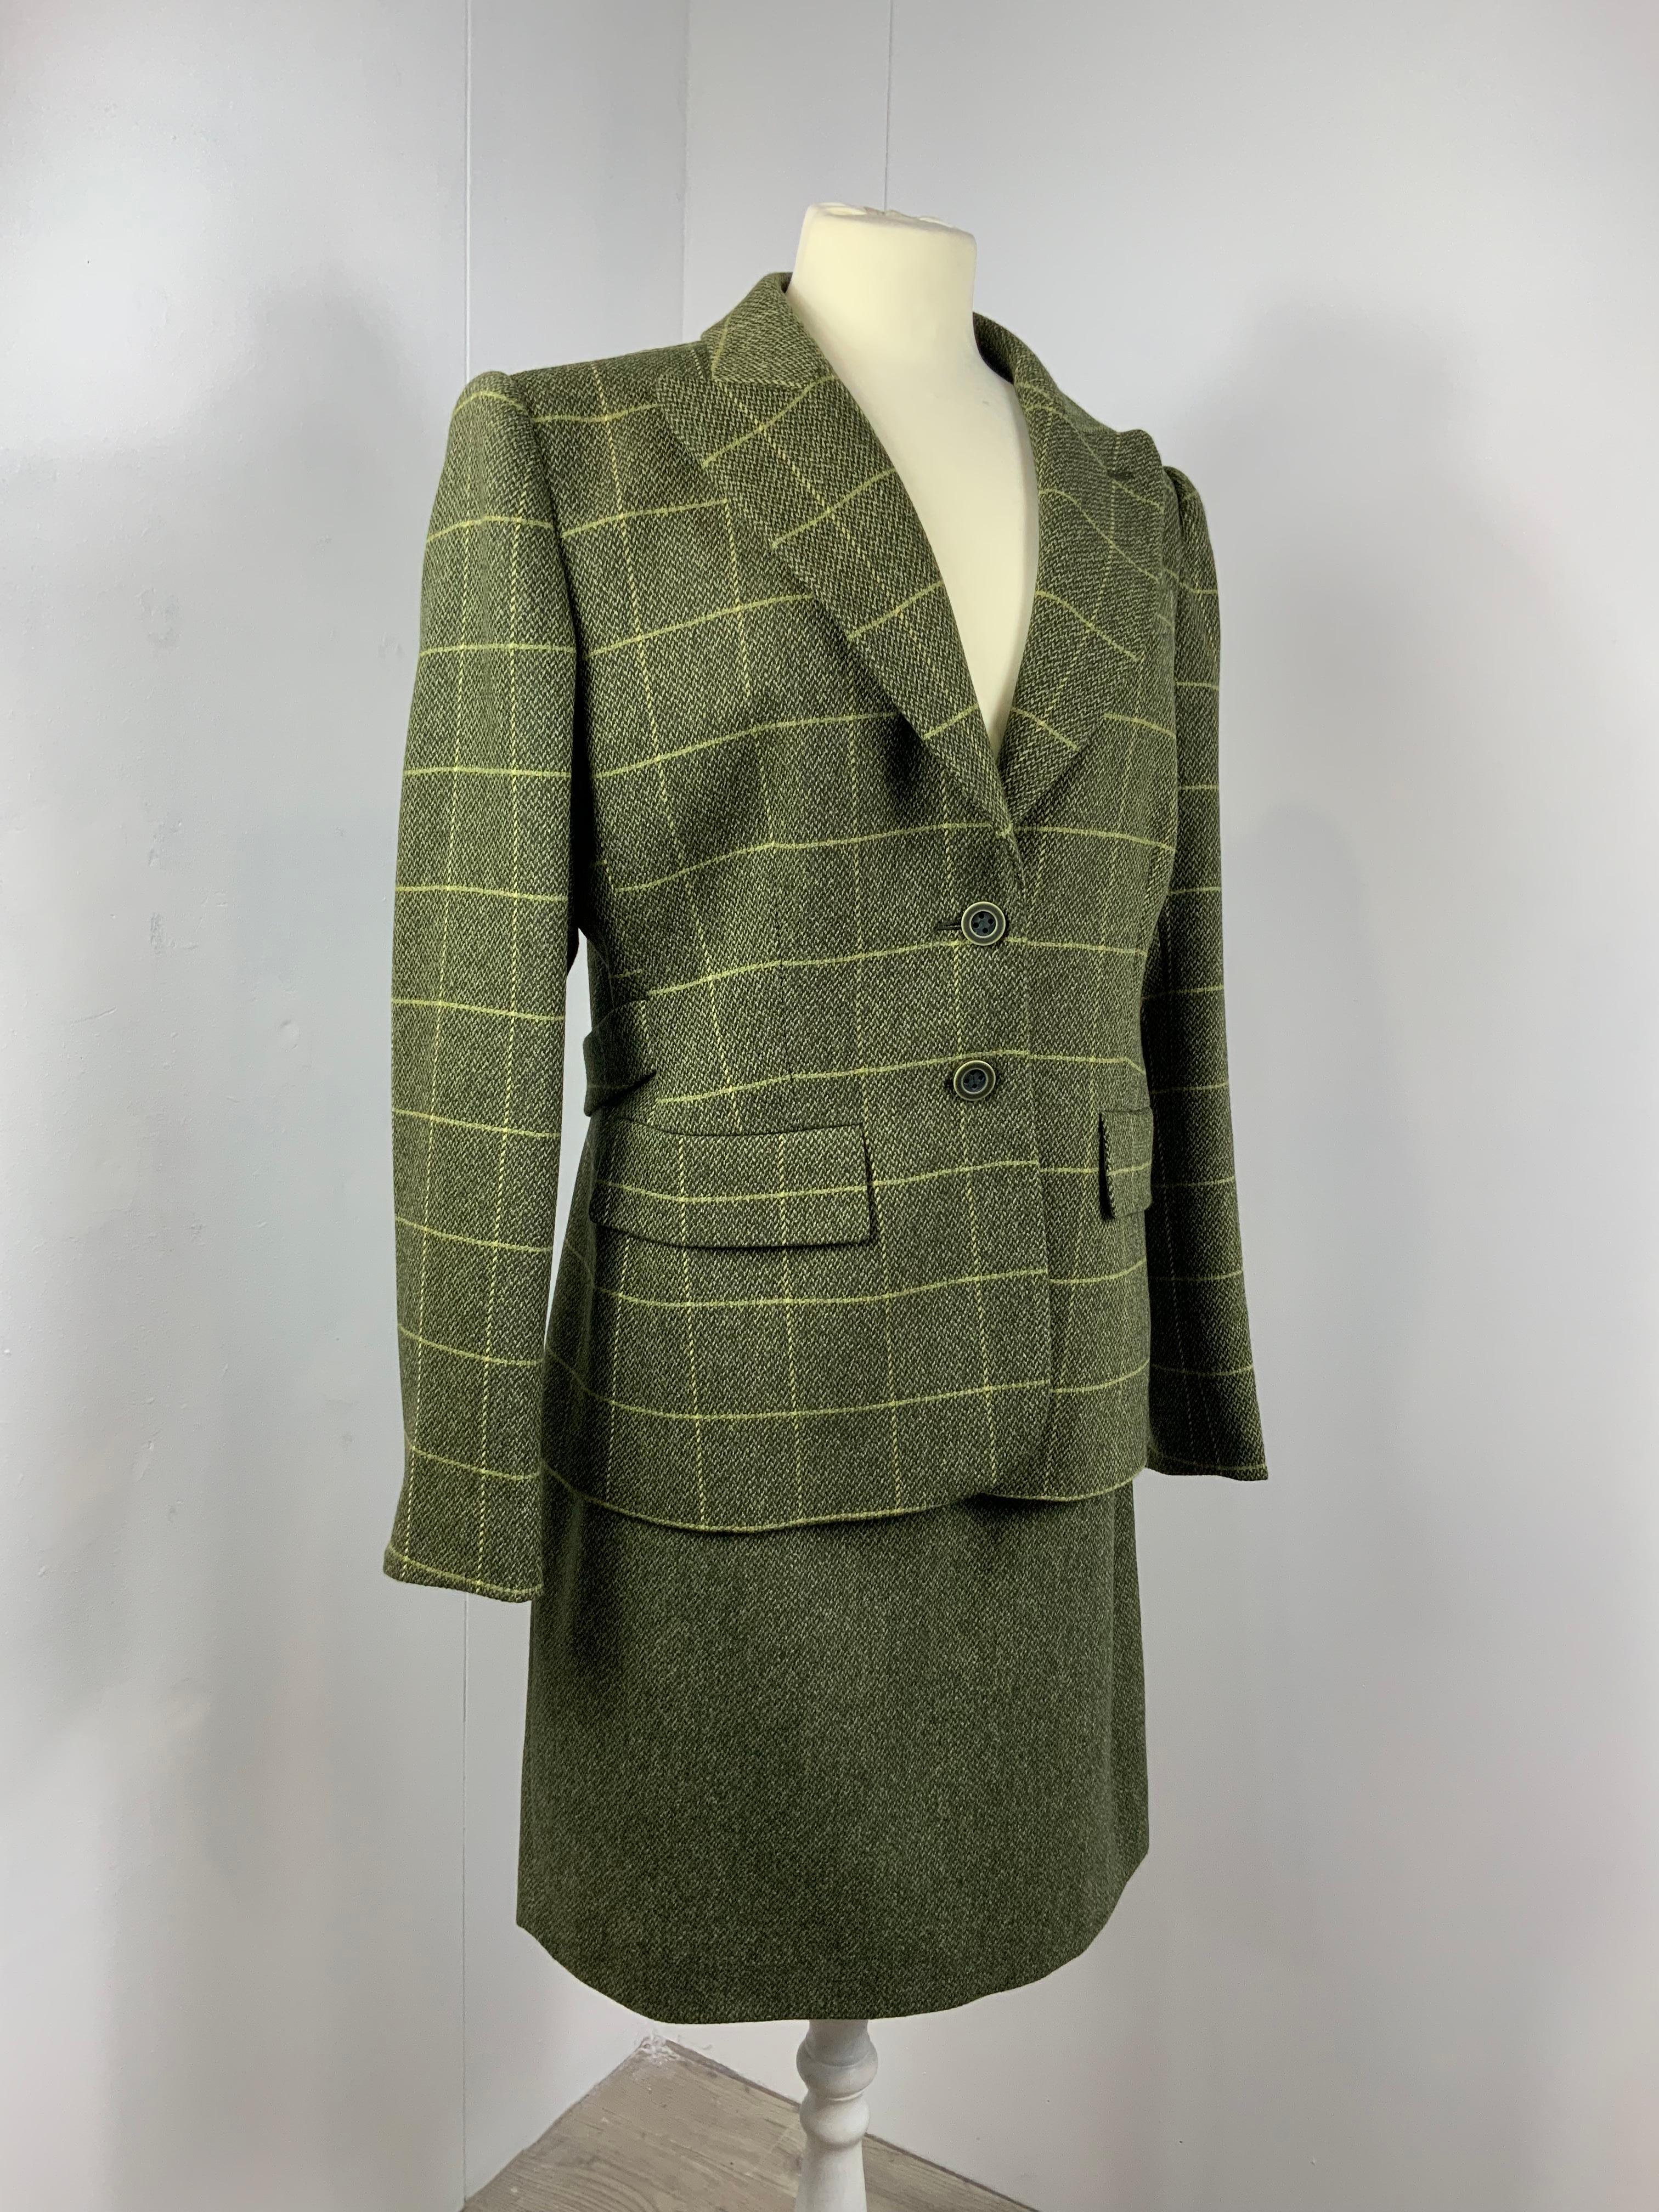 Valentino, Miss V Suit.
Jacket + skirt.
100% wool. Fully lined in acetate & rayon.
Featuring padded shoulders and 3 front pockets (2 still closed).
Size 48 Italian.
Shoulders 48 cm
Bust 50 cm 
Length 70 cm
Sleeves 63 cm
Skirt features a posterior